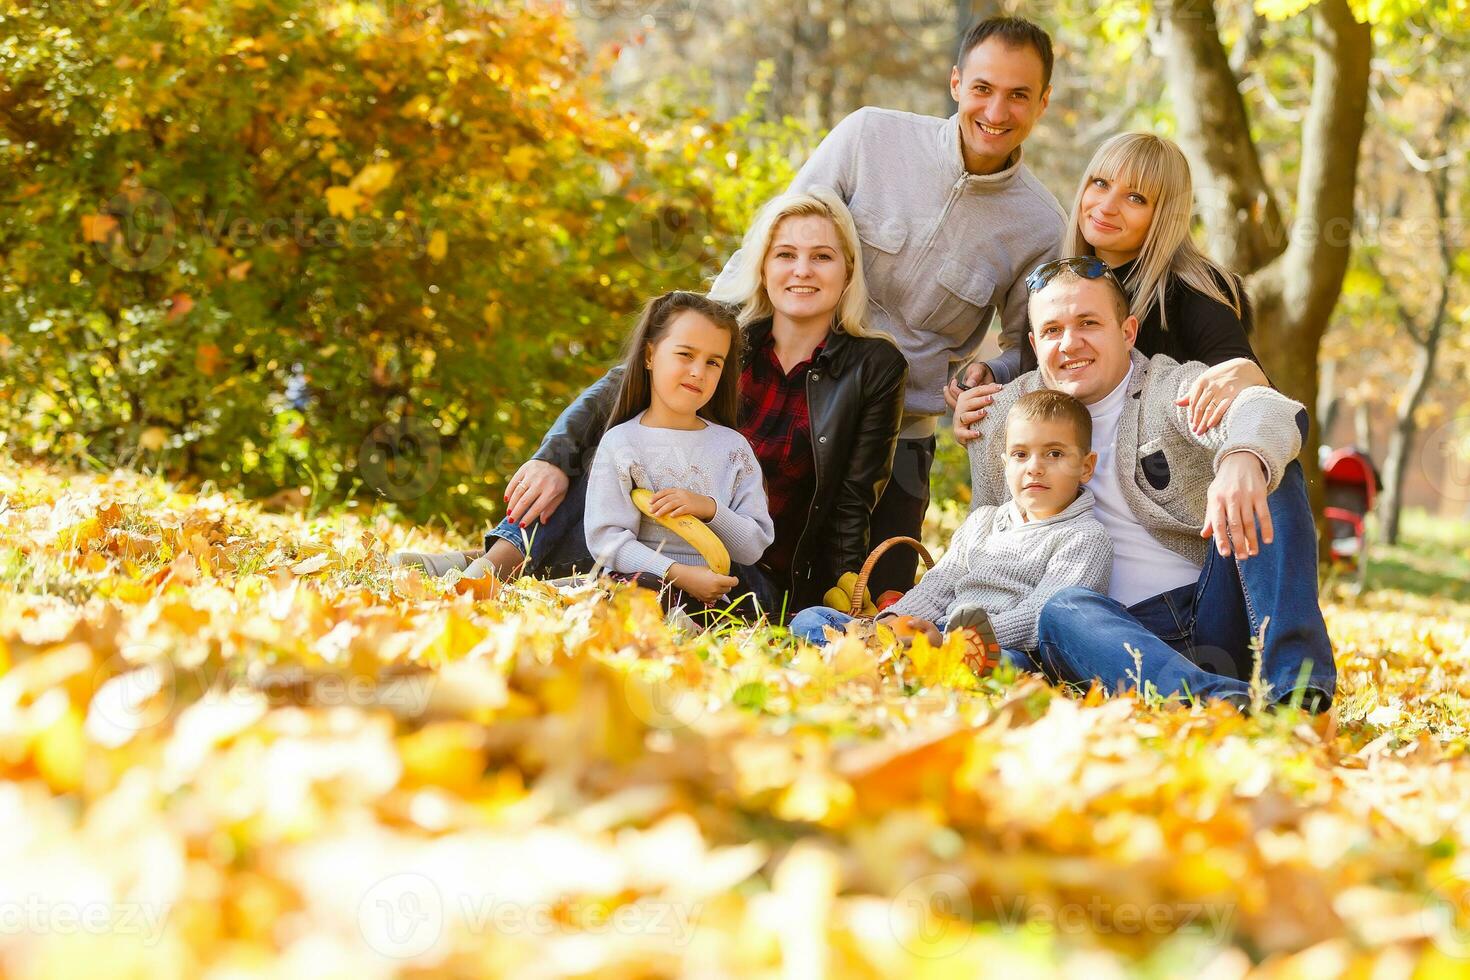 The family walks in the park in autumn photo